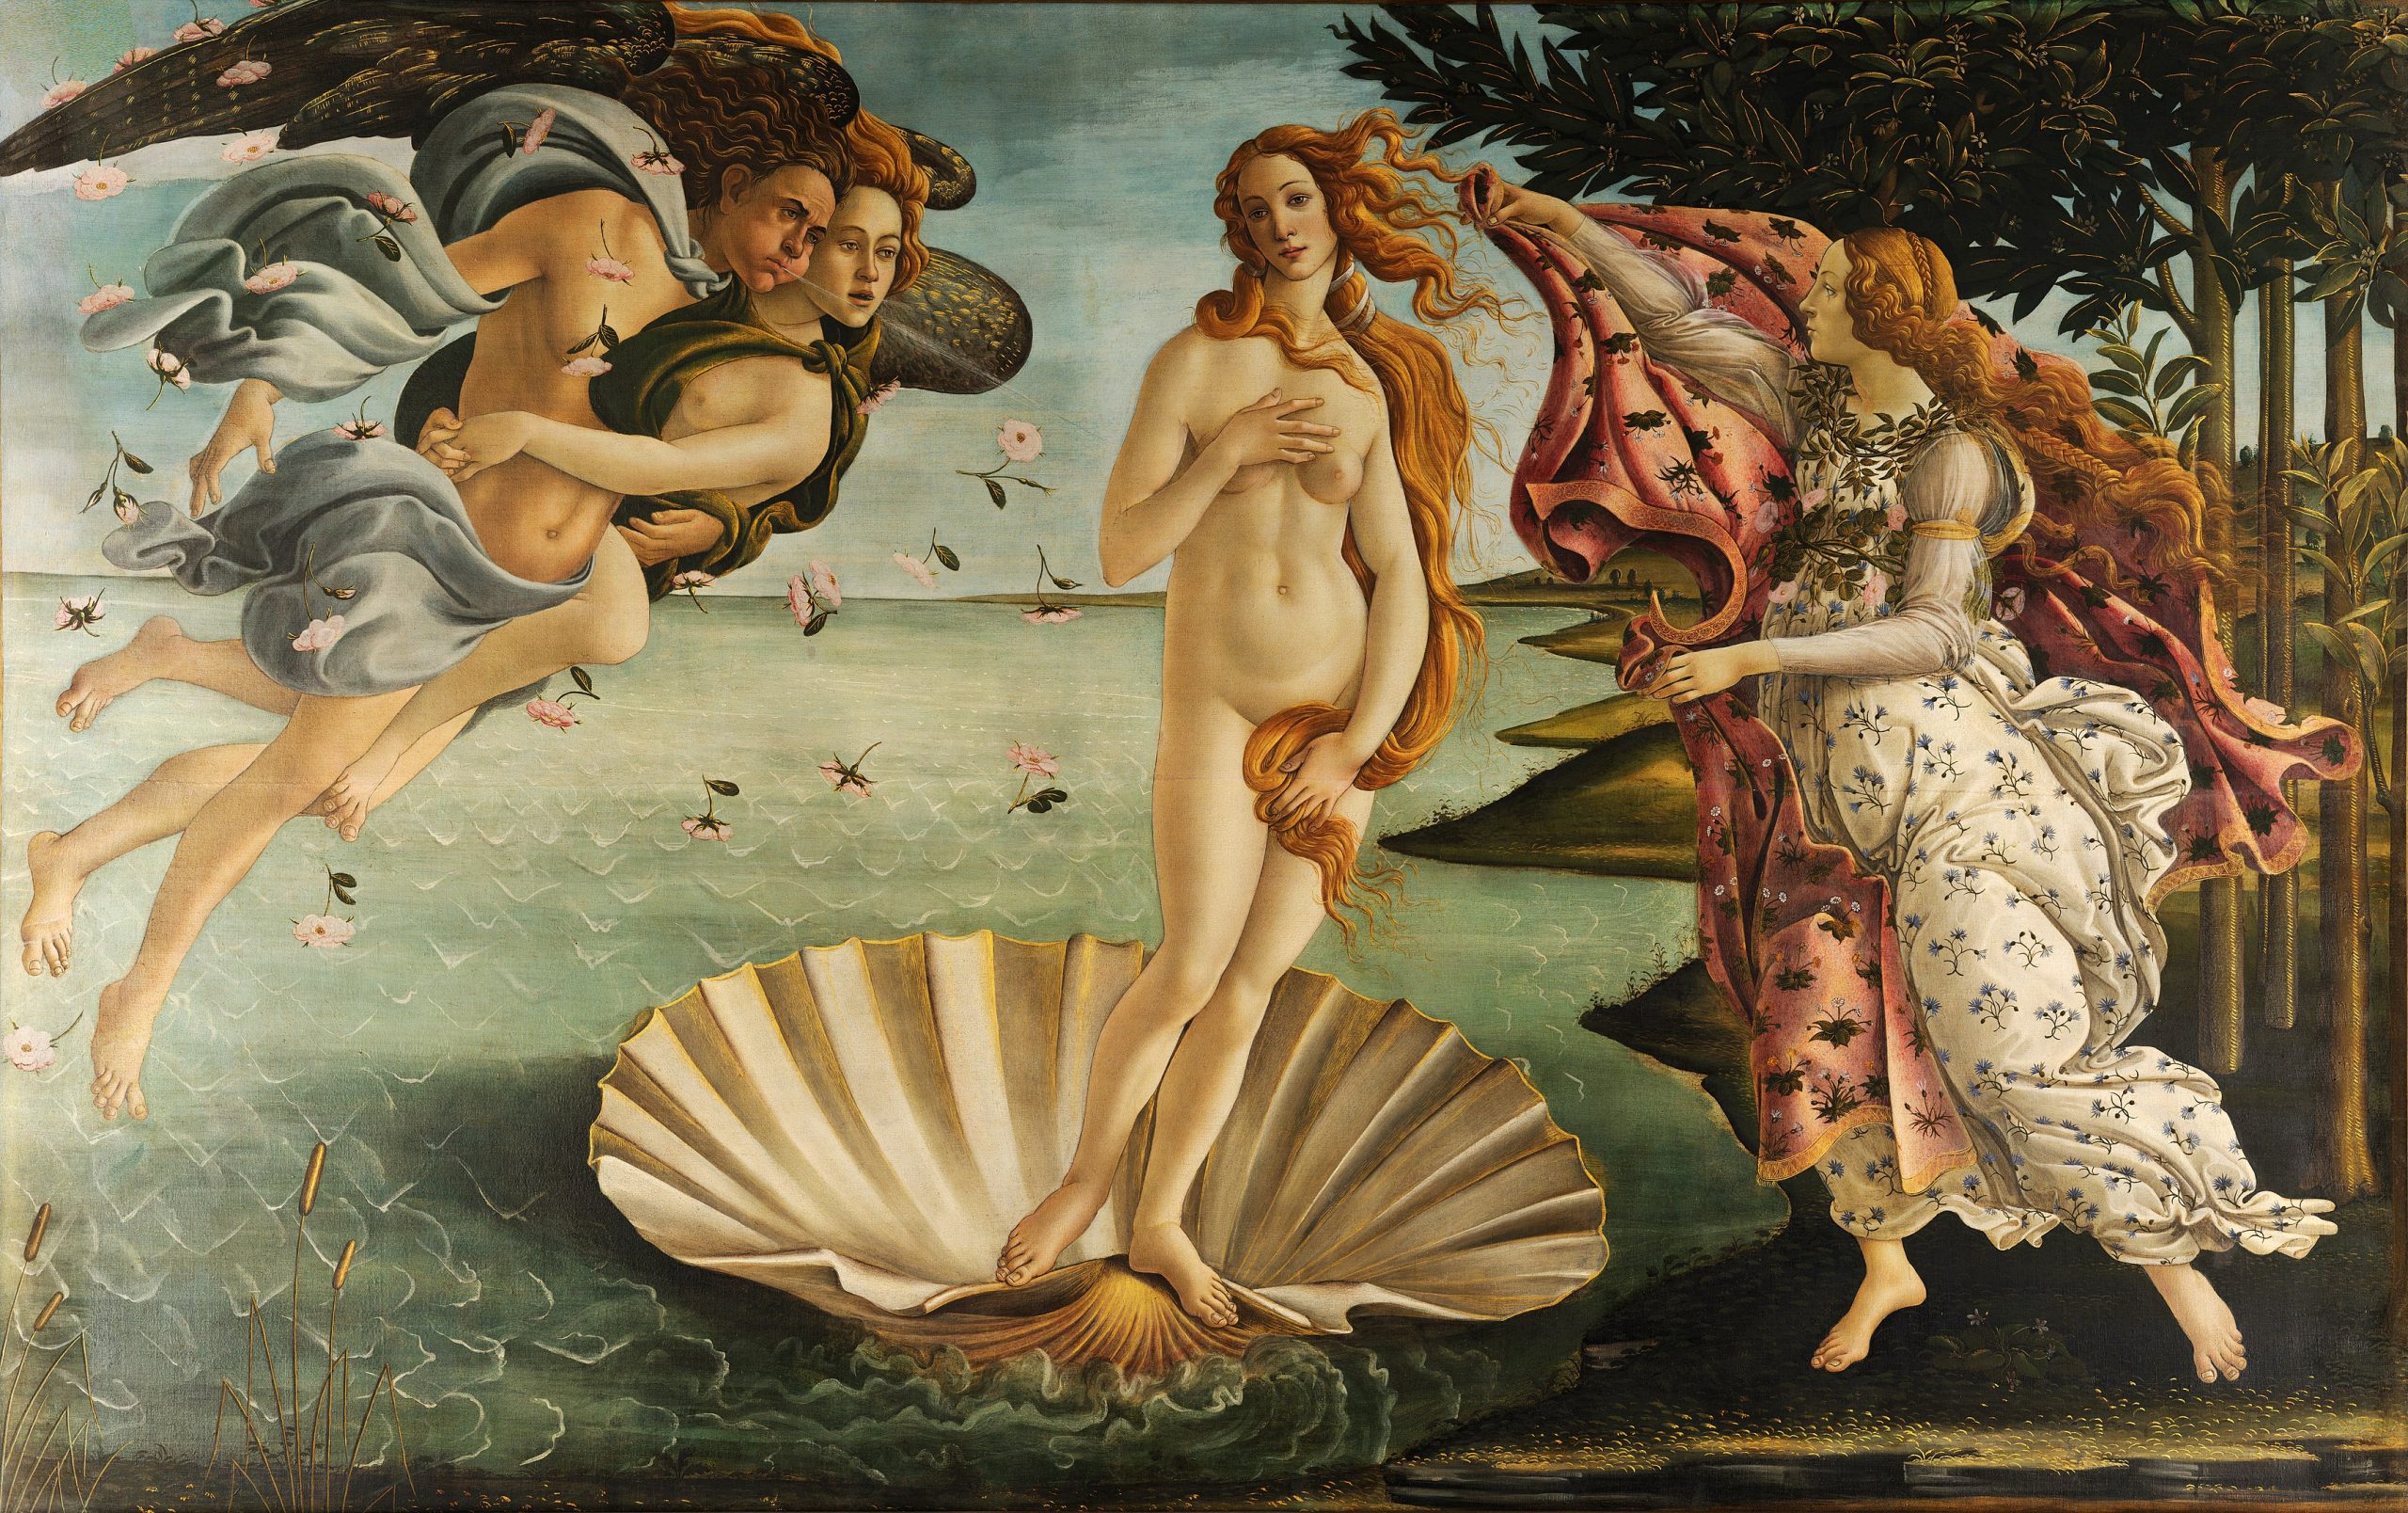 A nude woman standing on a scallop shell in the sea with three attendants, one in a nearby forest and the other two levitating above the sea